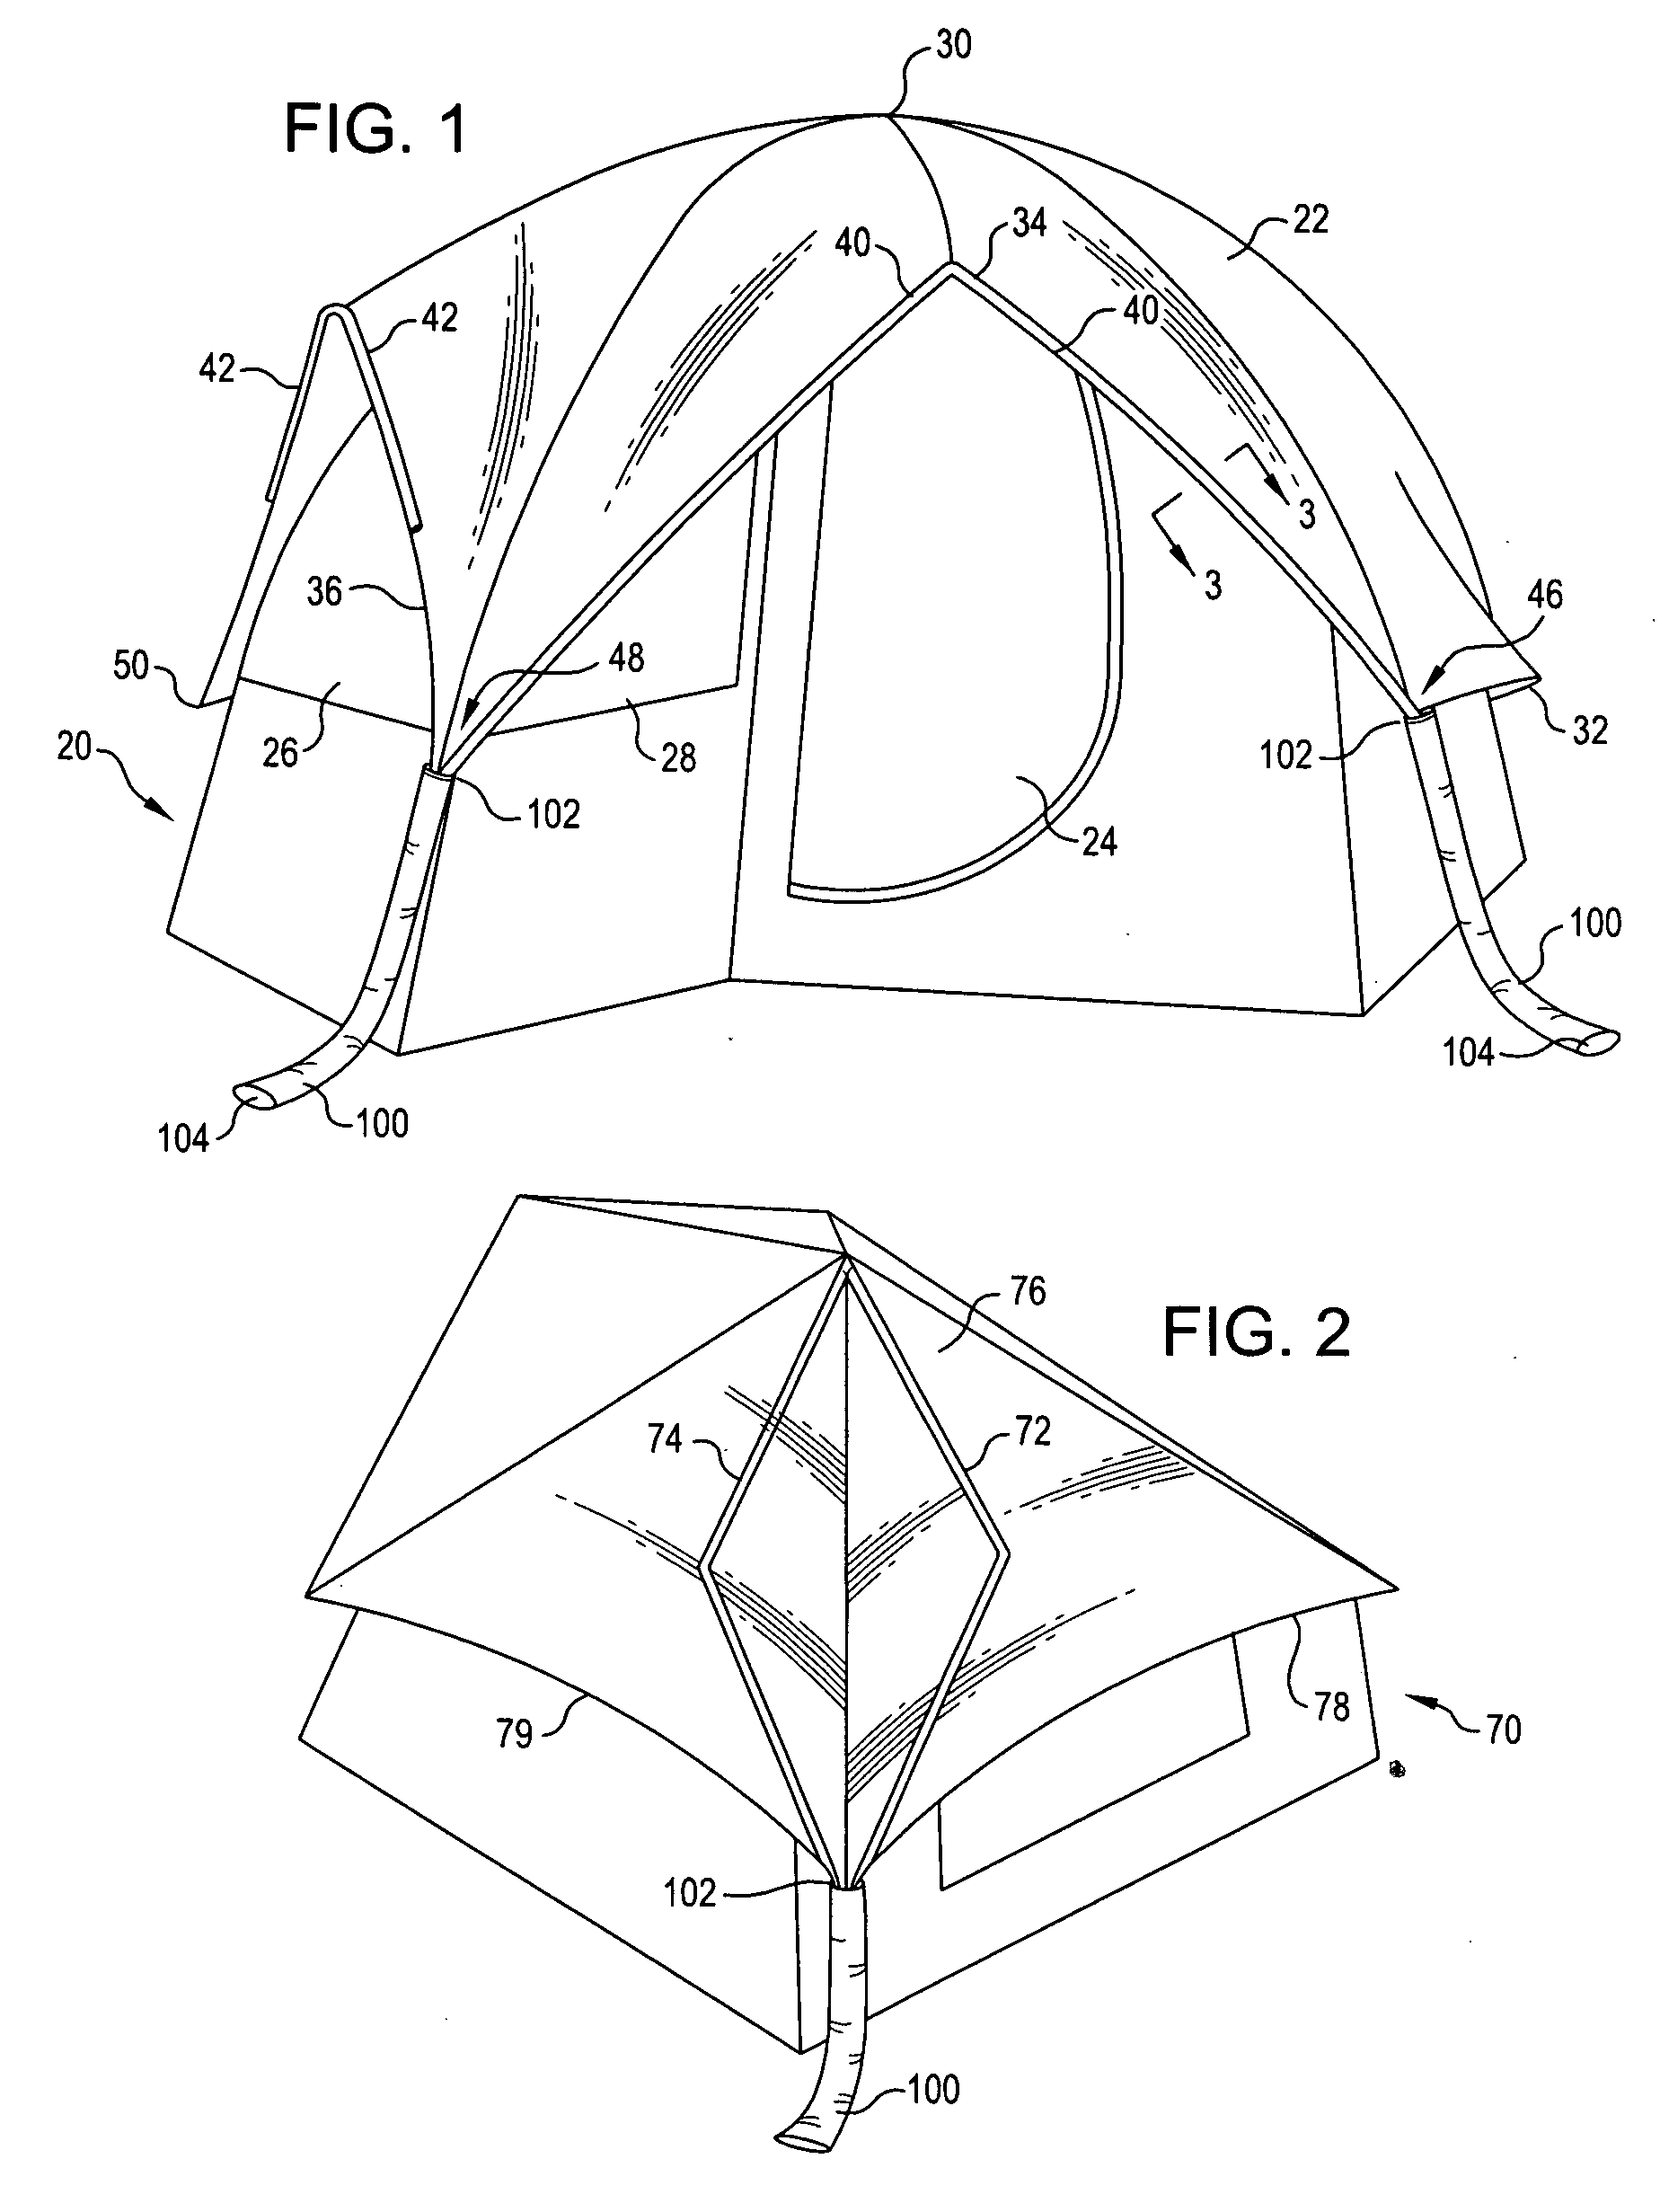 Gutter and downspout system for a tent or shelter